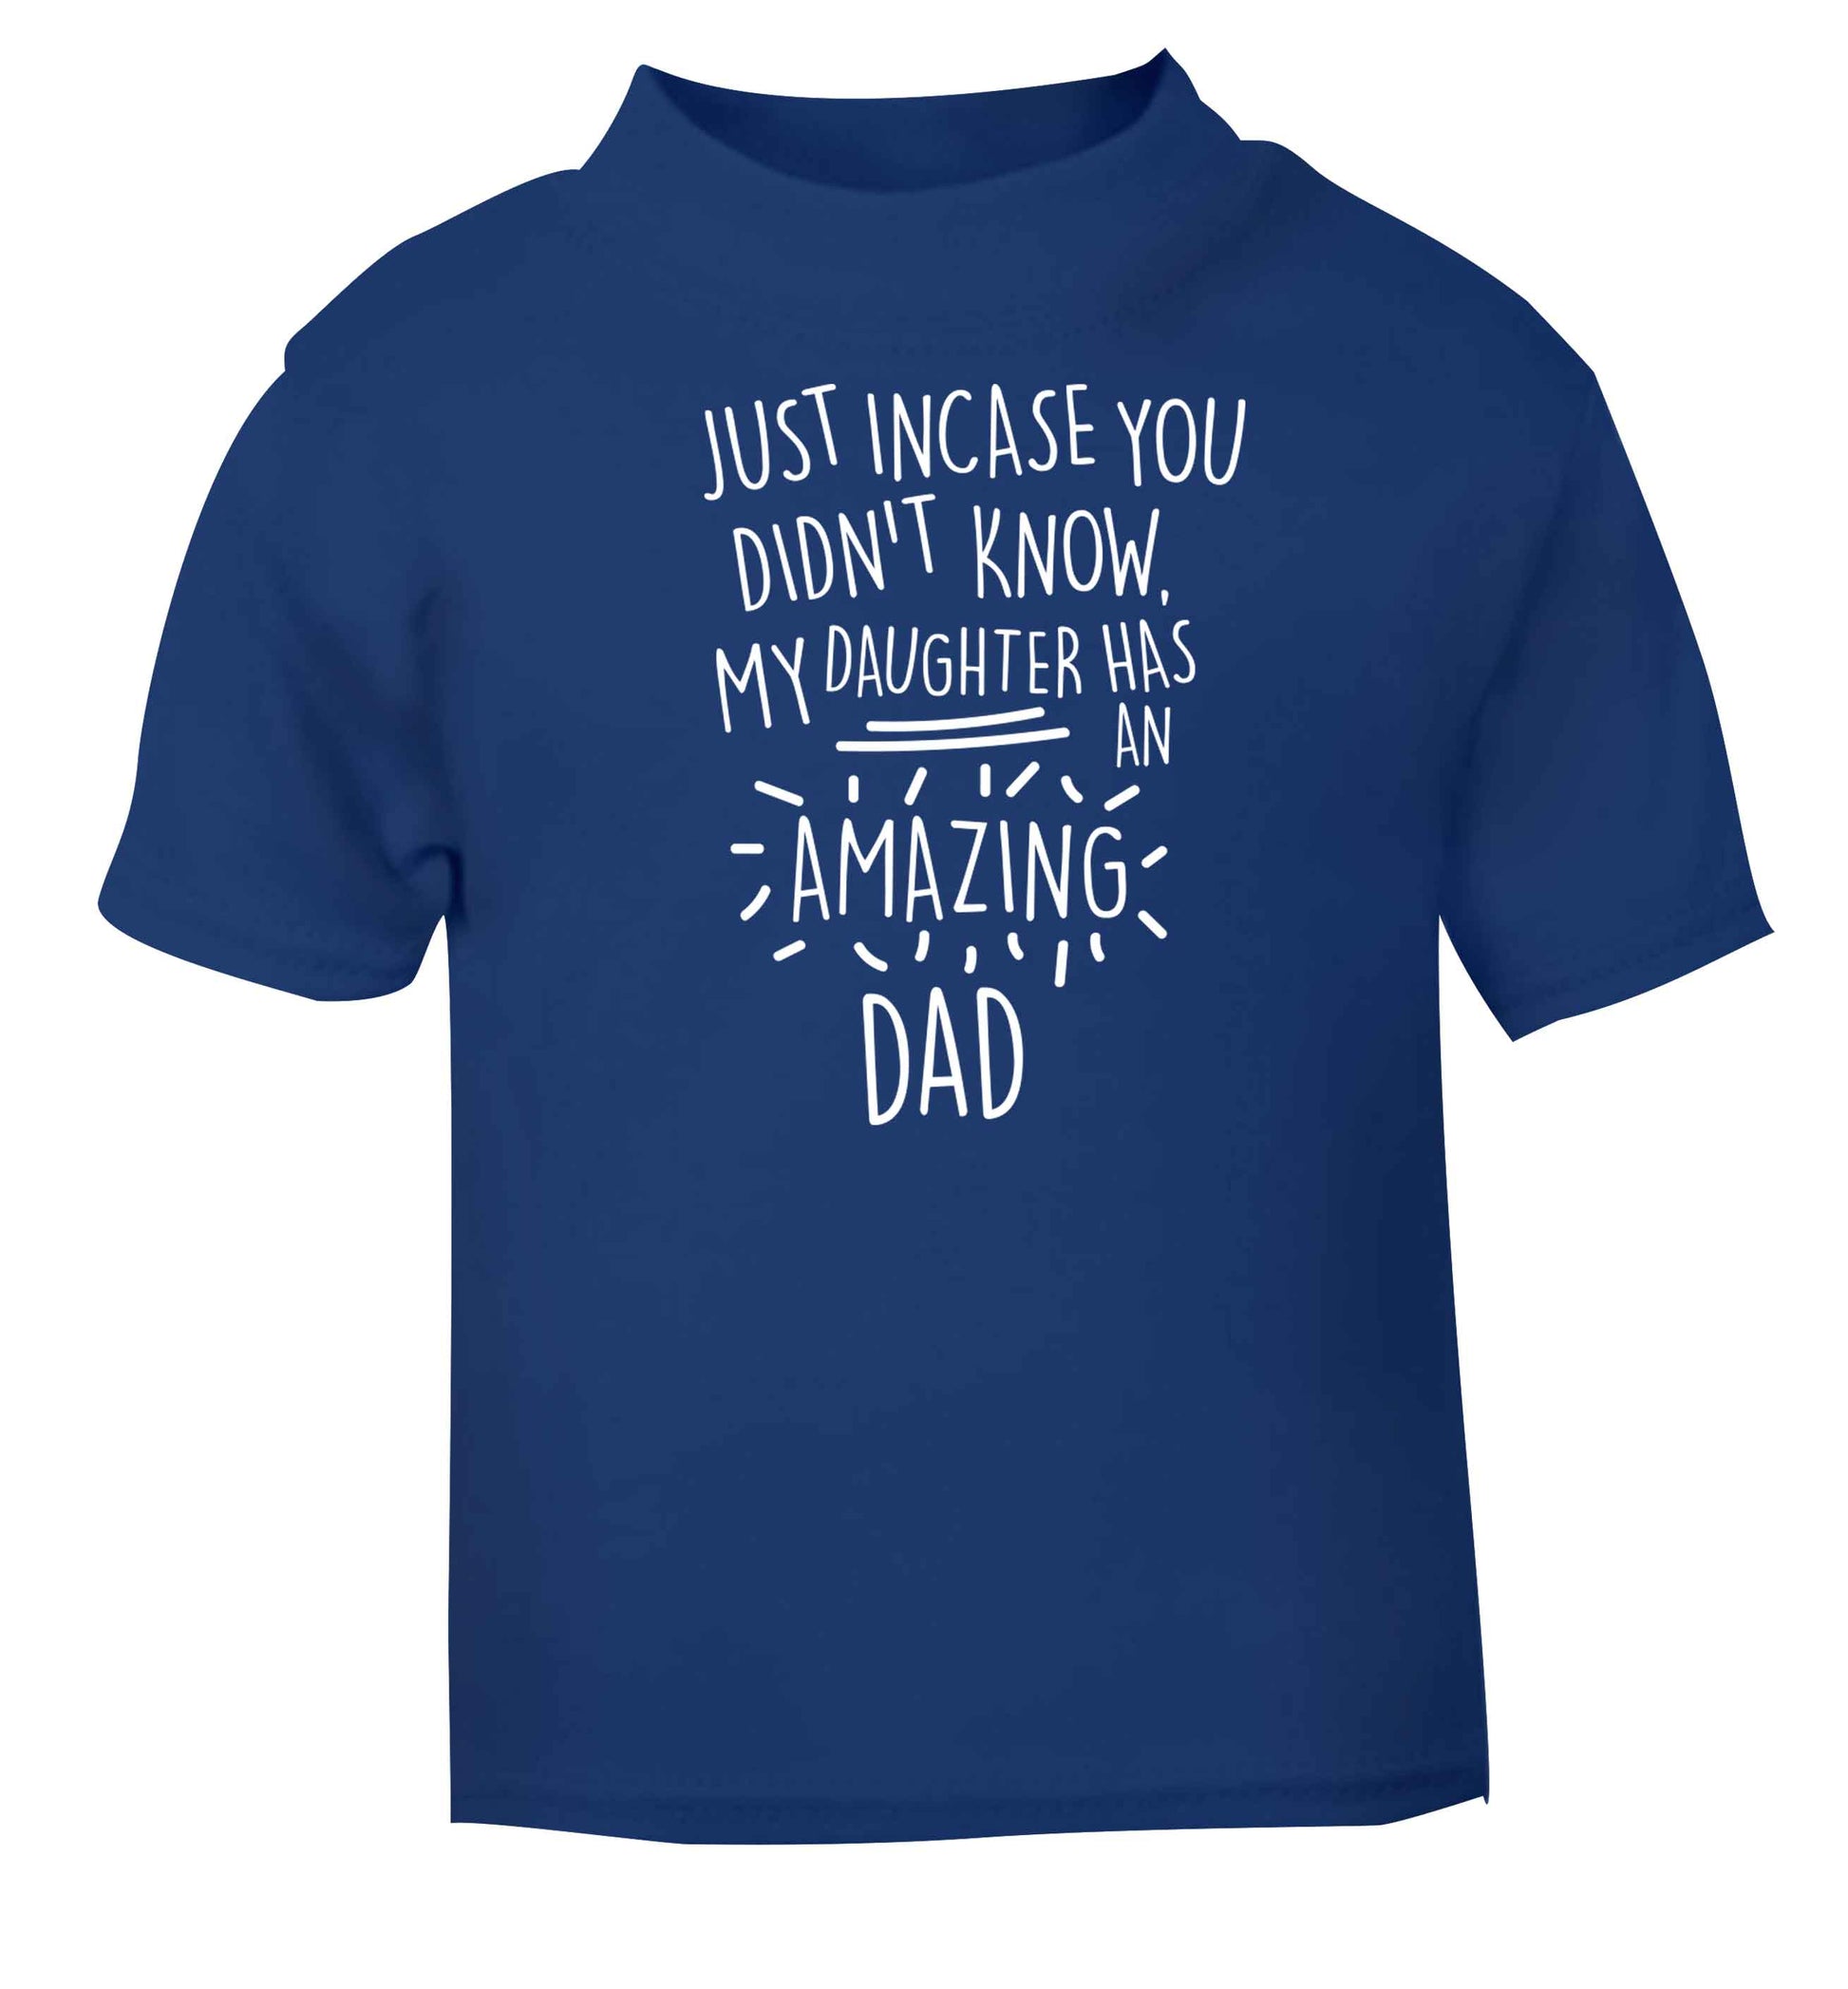 Just incase you didn't know my daughter has an amazing dad blue baby toddler Tshirt 2 Years